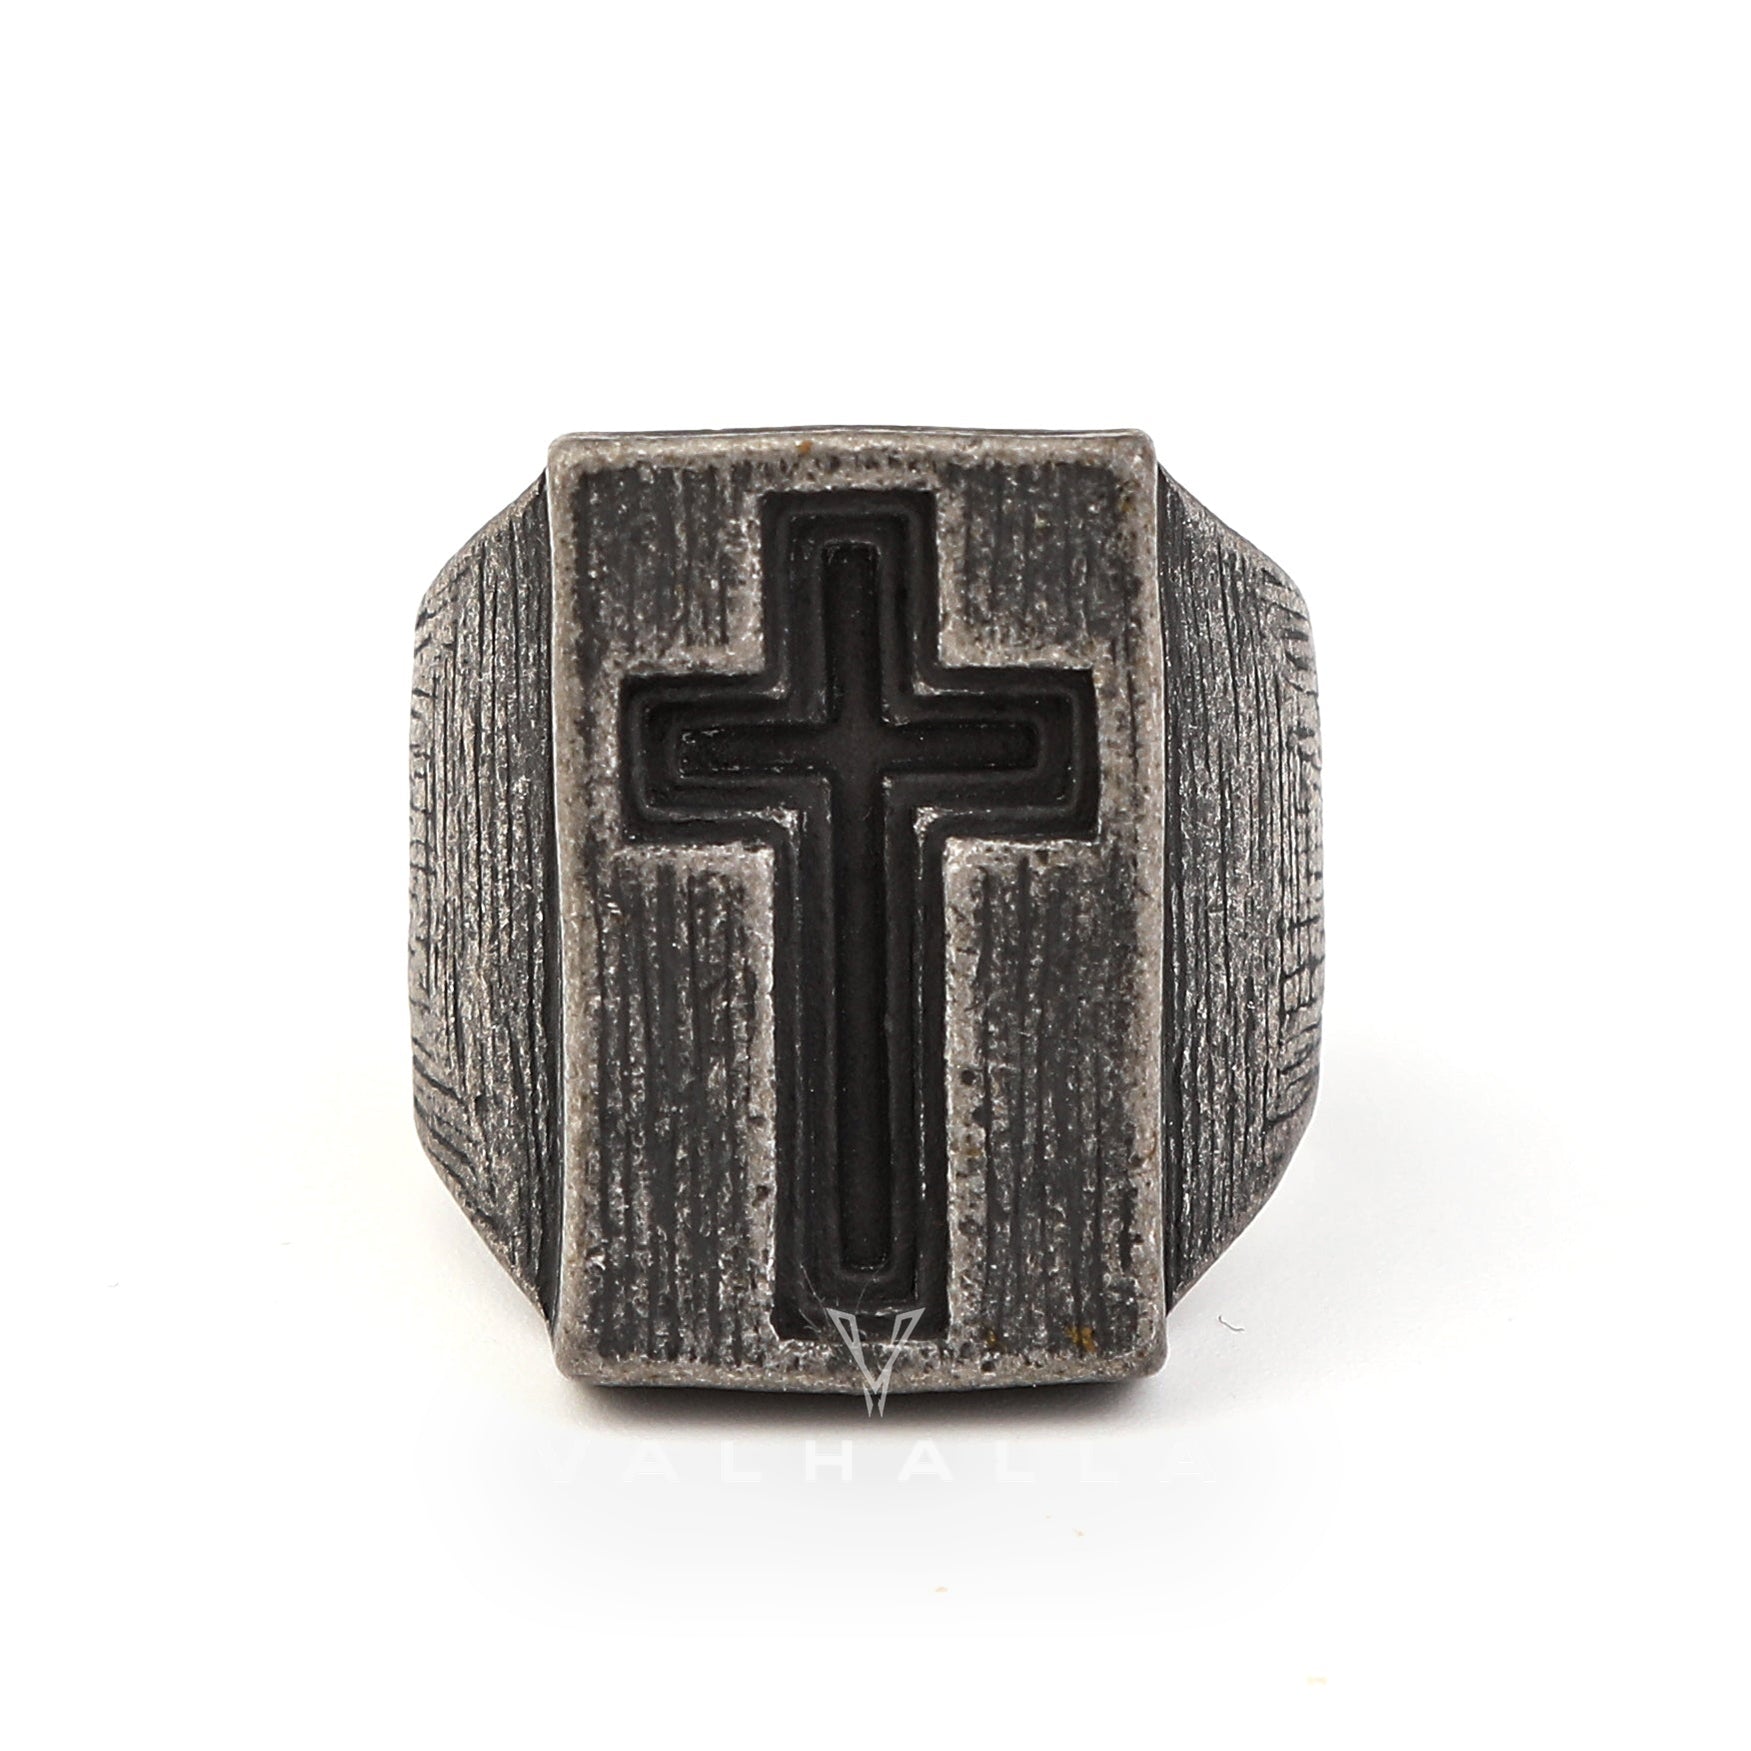 The Gate of Heaven Stainless Steel Cross Ring